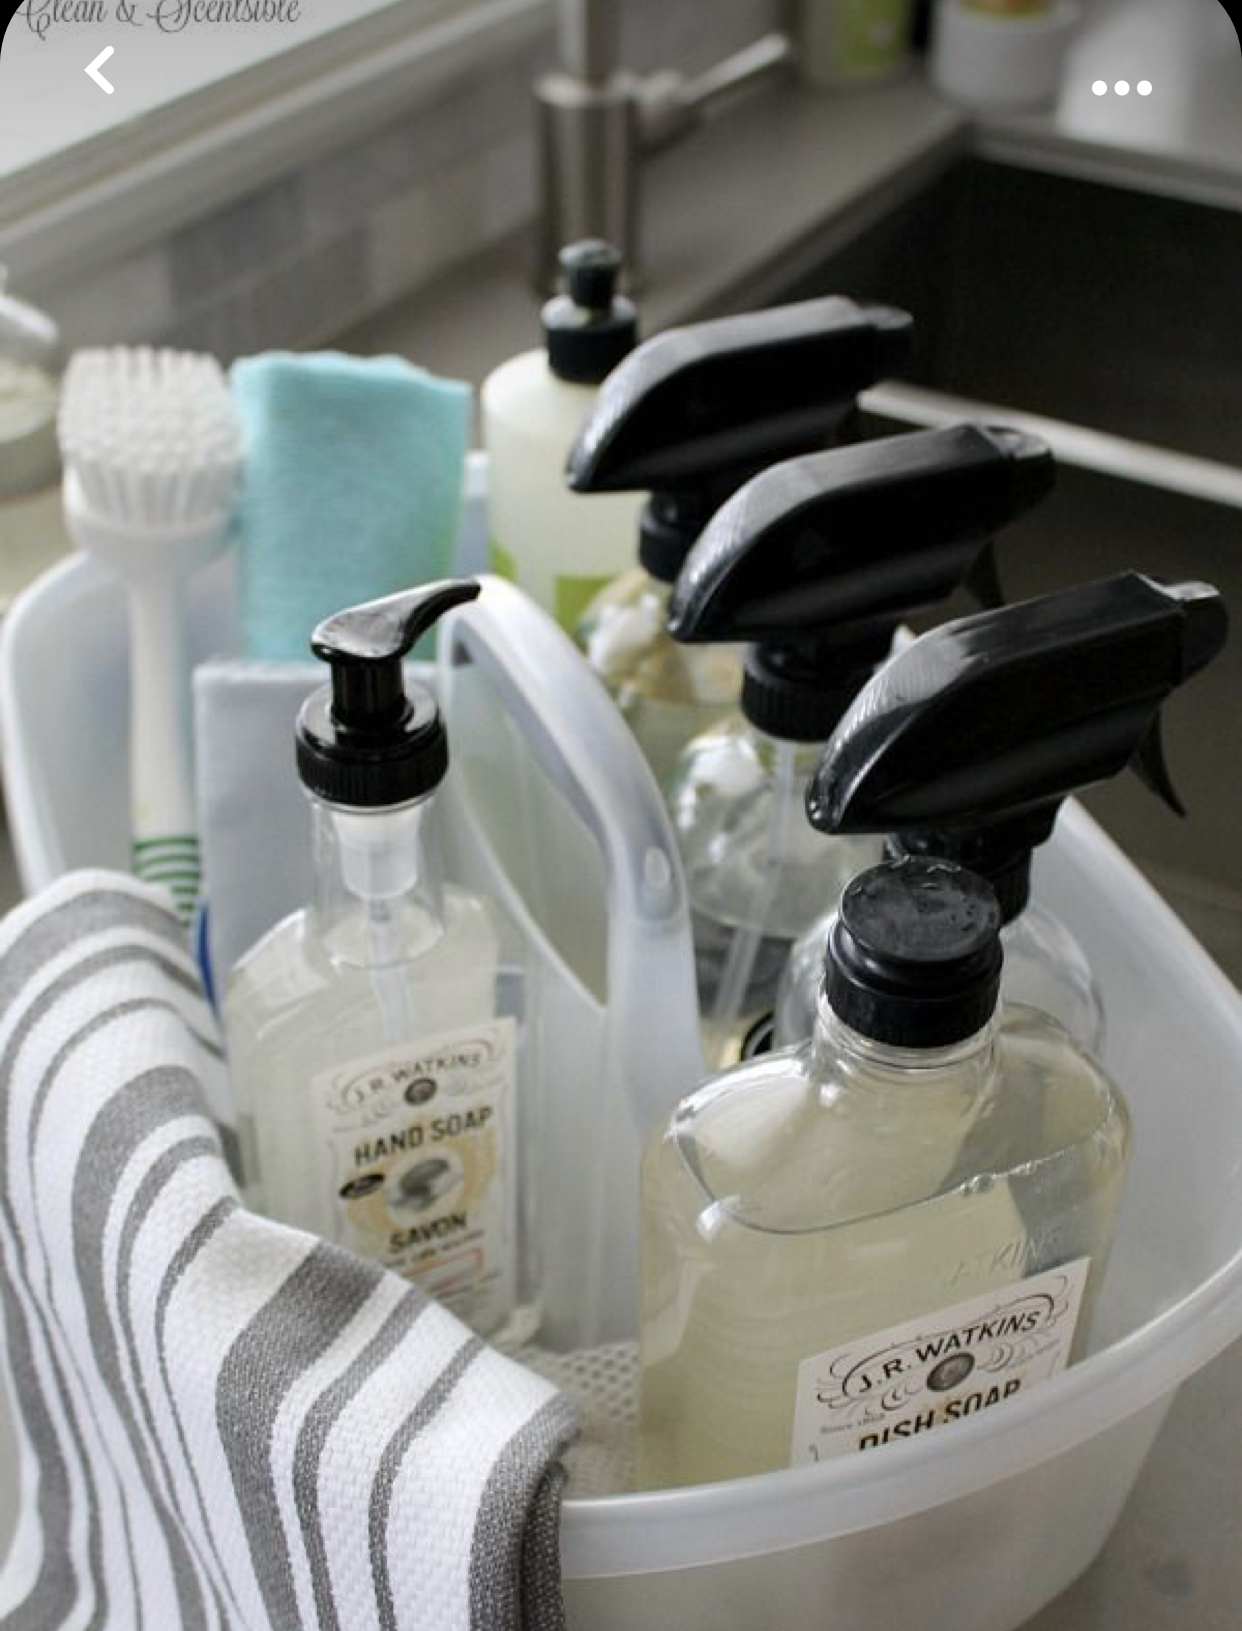 Cleaning supplies gift hamper